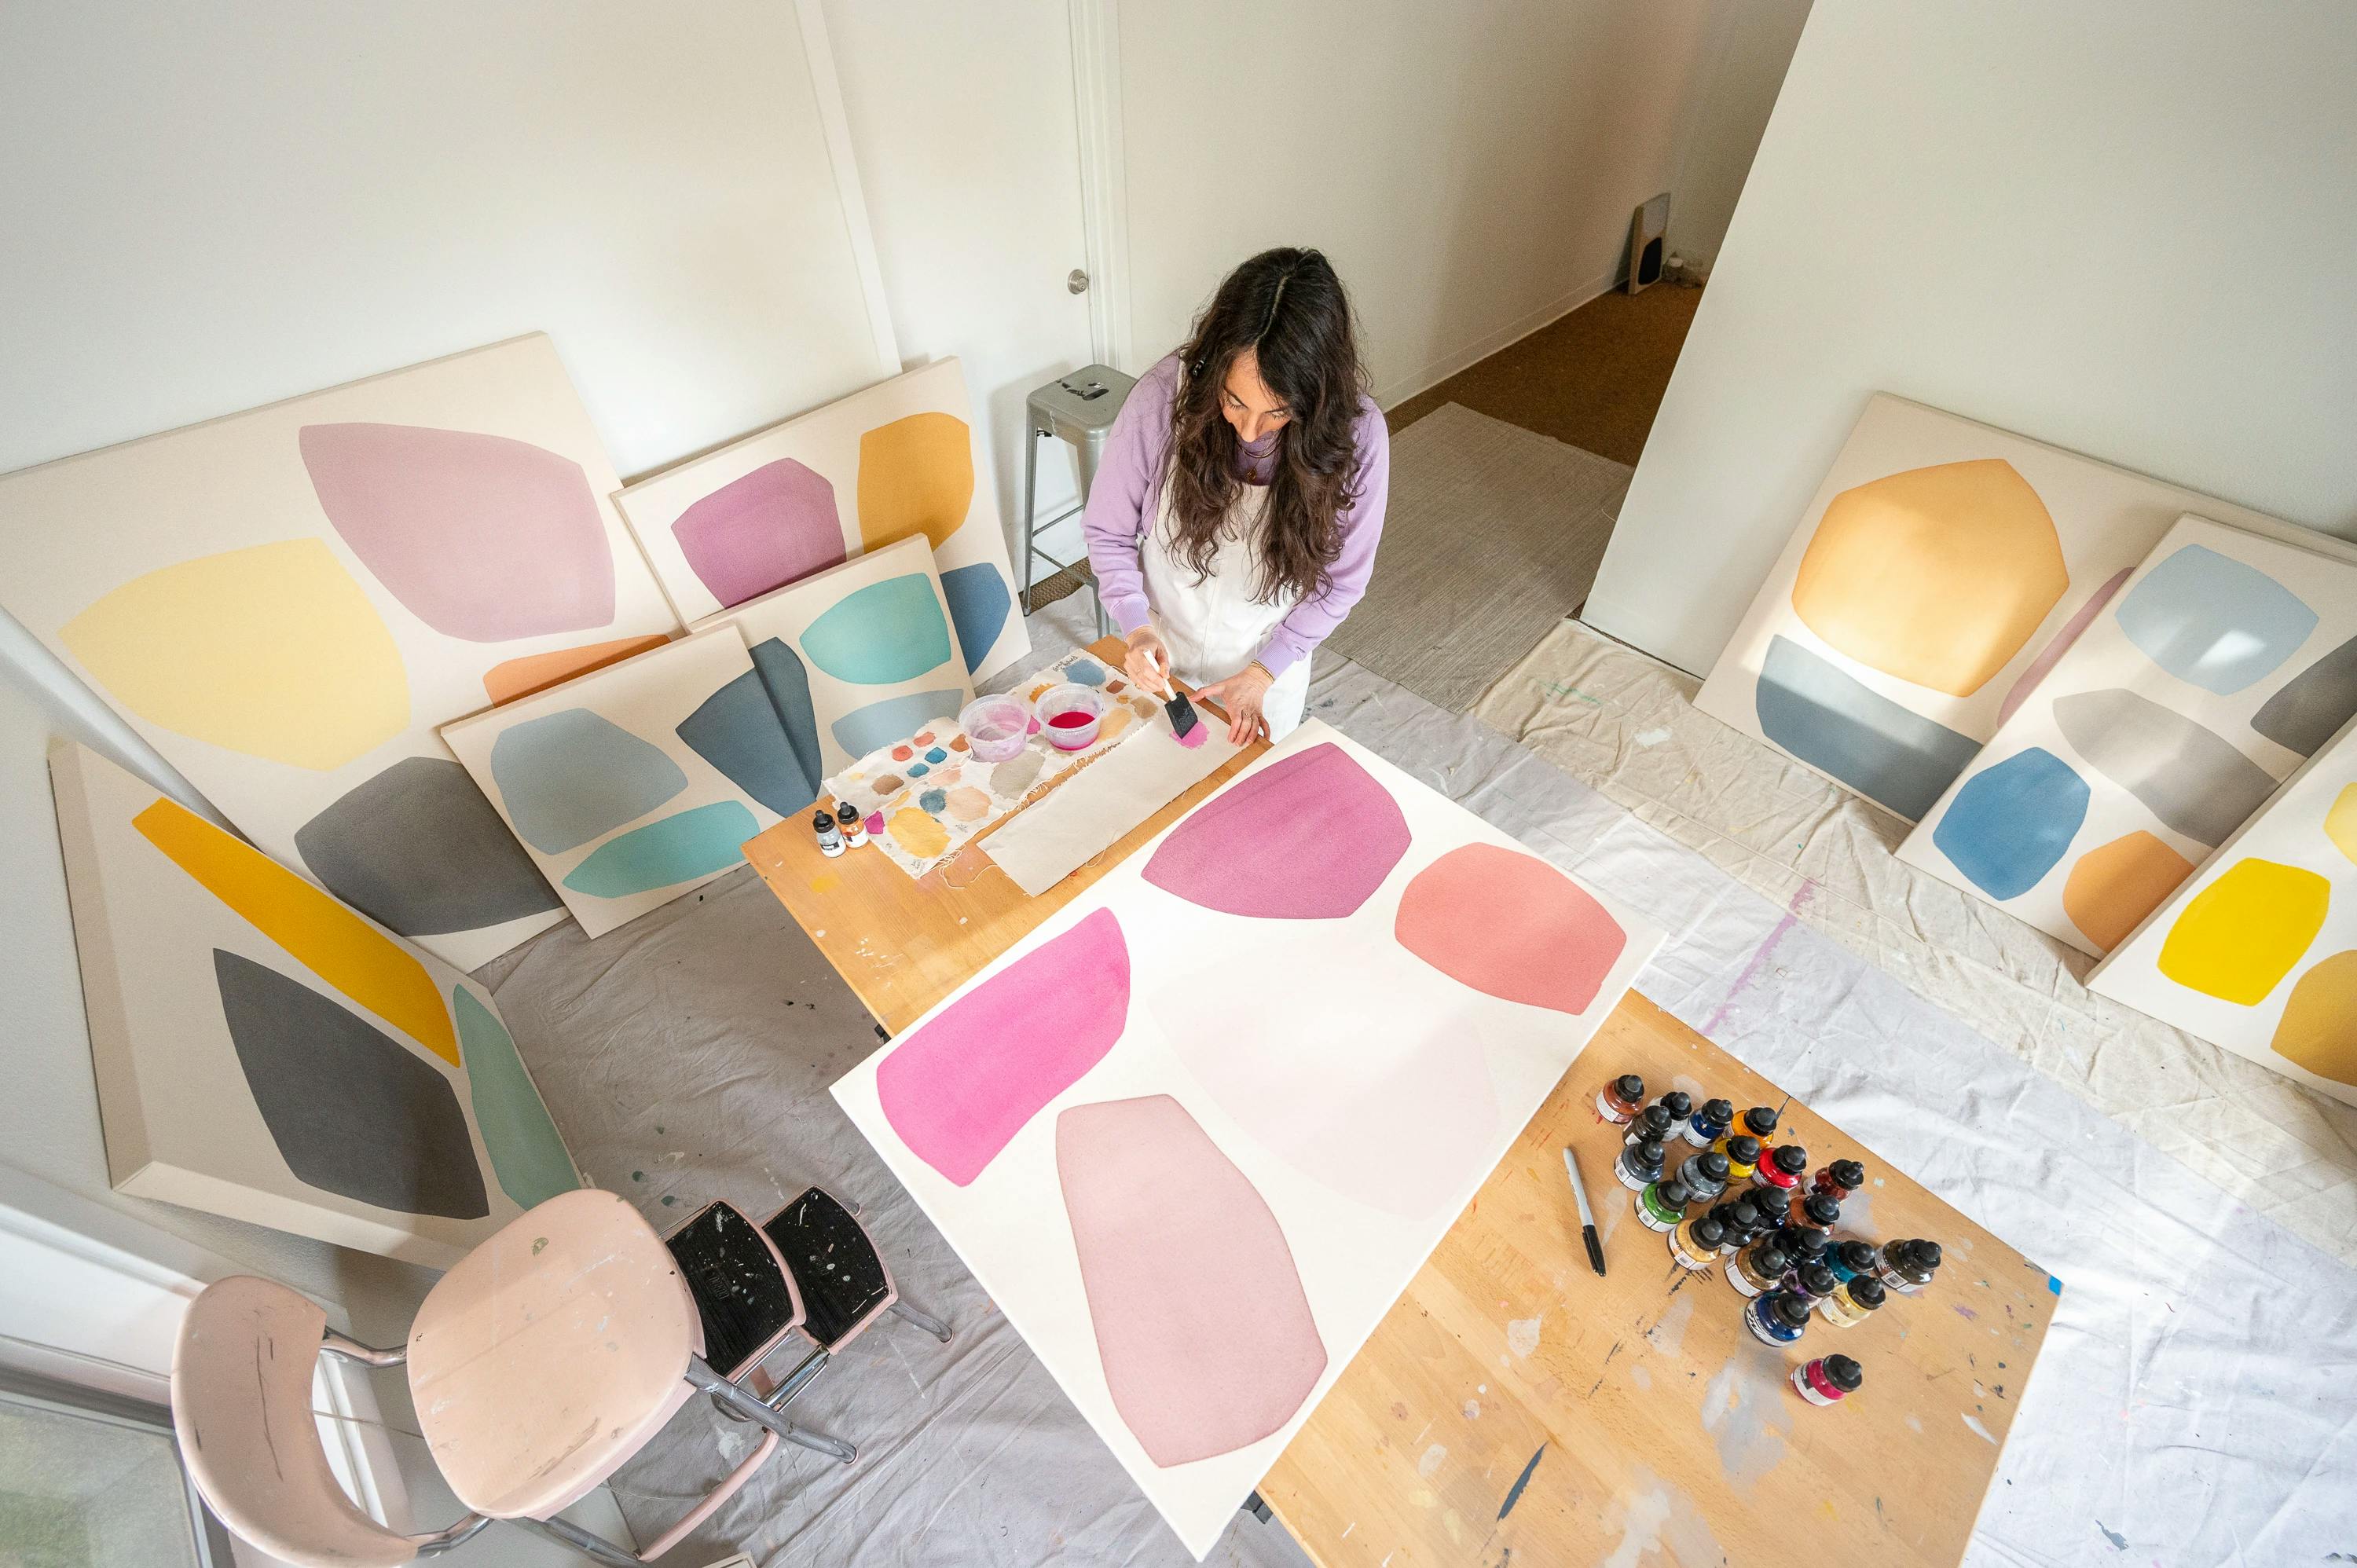 Artist Mia Farrington in her studio surrounded by colorful painted canvases.